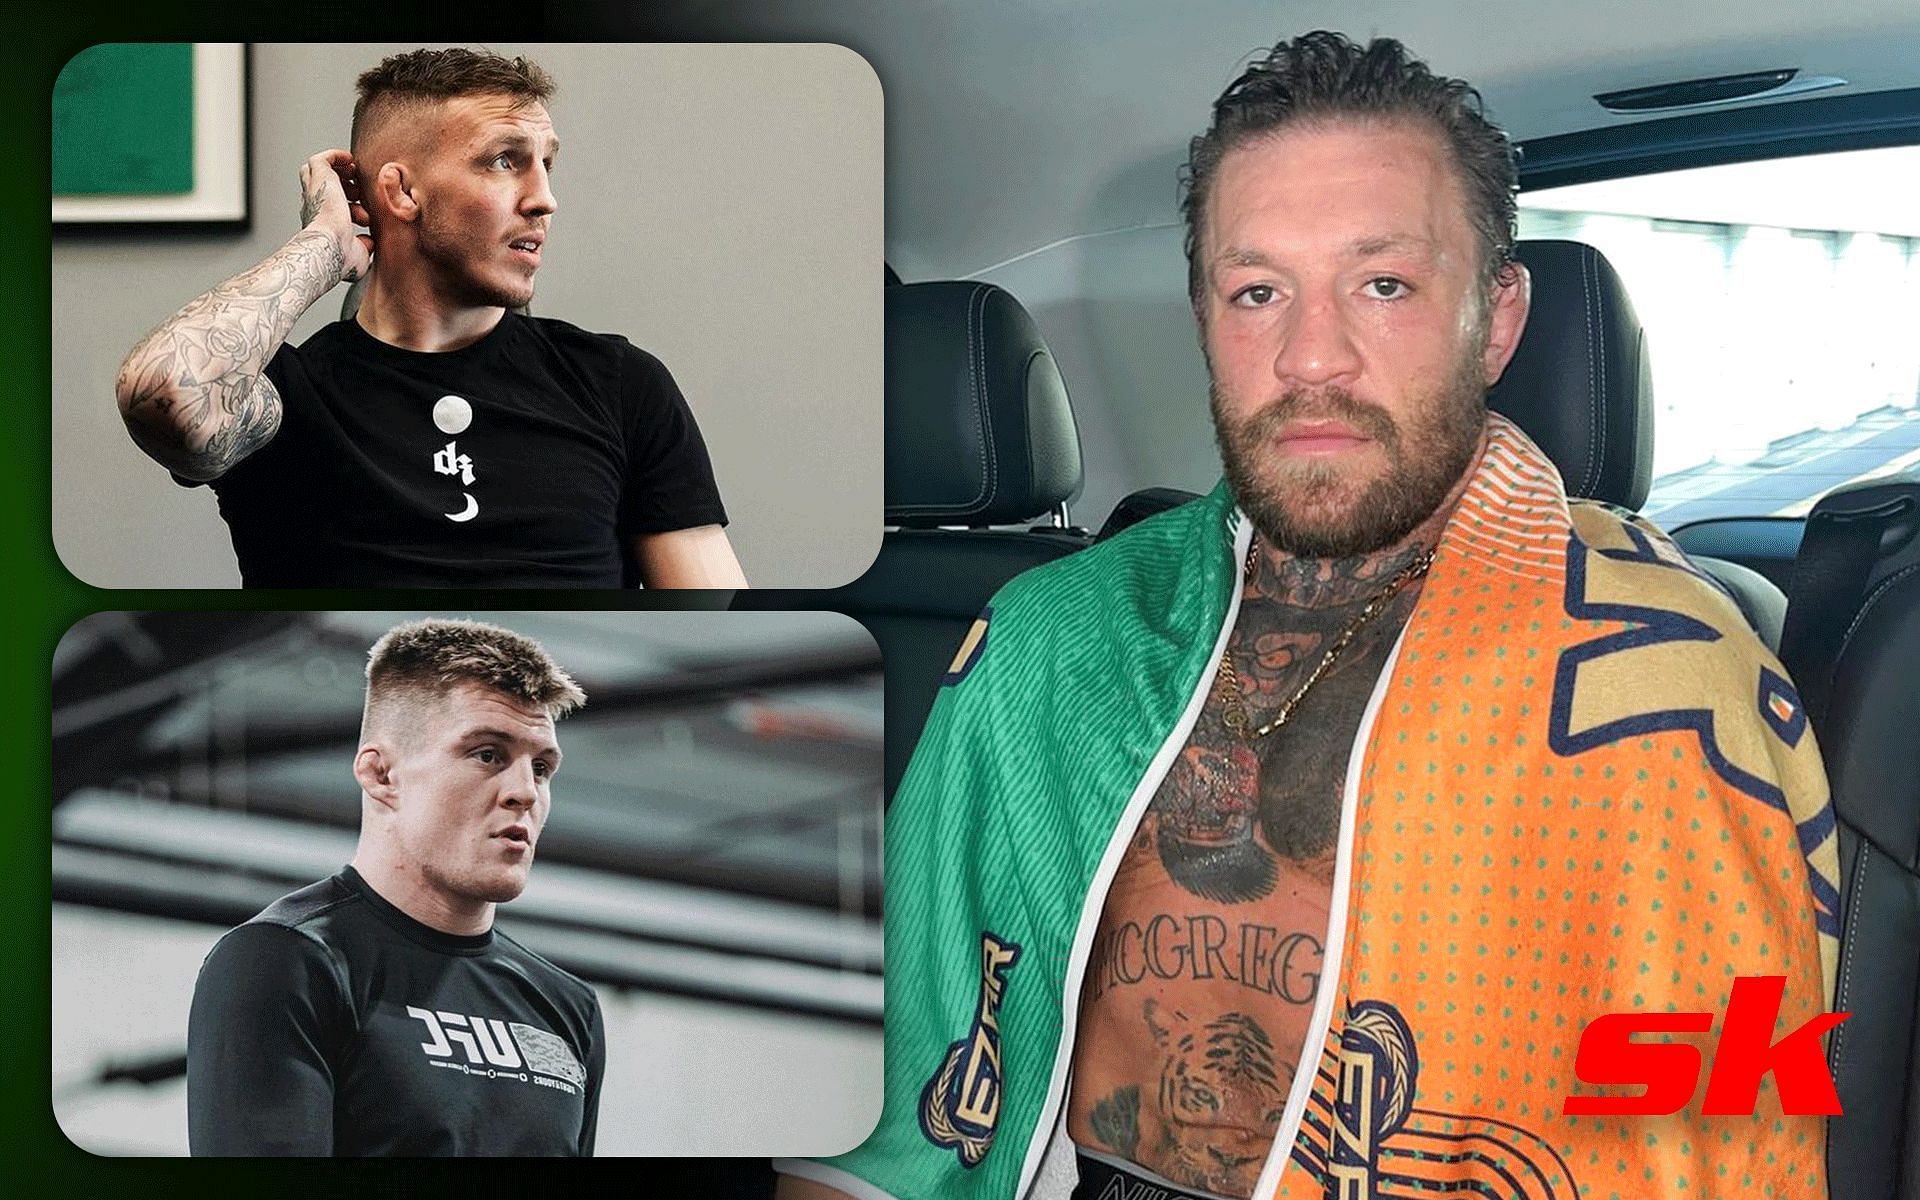 Rhys McKee (top left), Caolan Loughran (bottom left) and Conor McGregor (right) [Image credits: @thenotoriousmma, @rhysmckeemma and @doncaolan135 on Instagram]